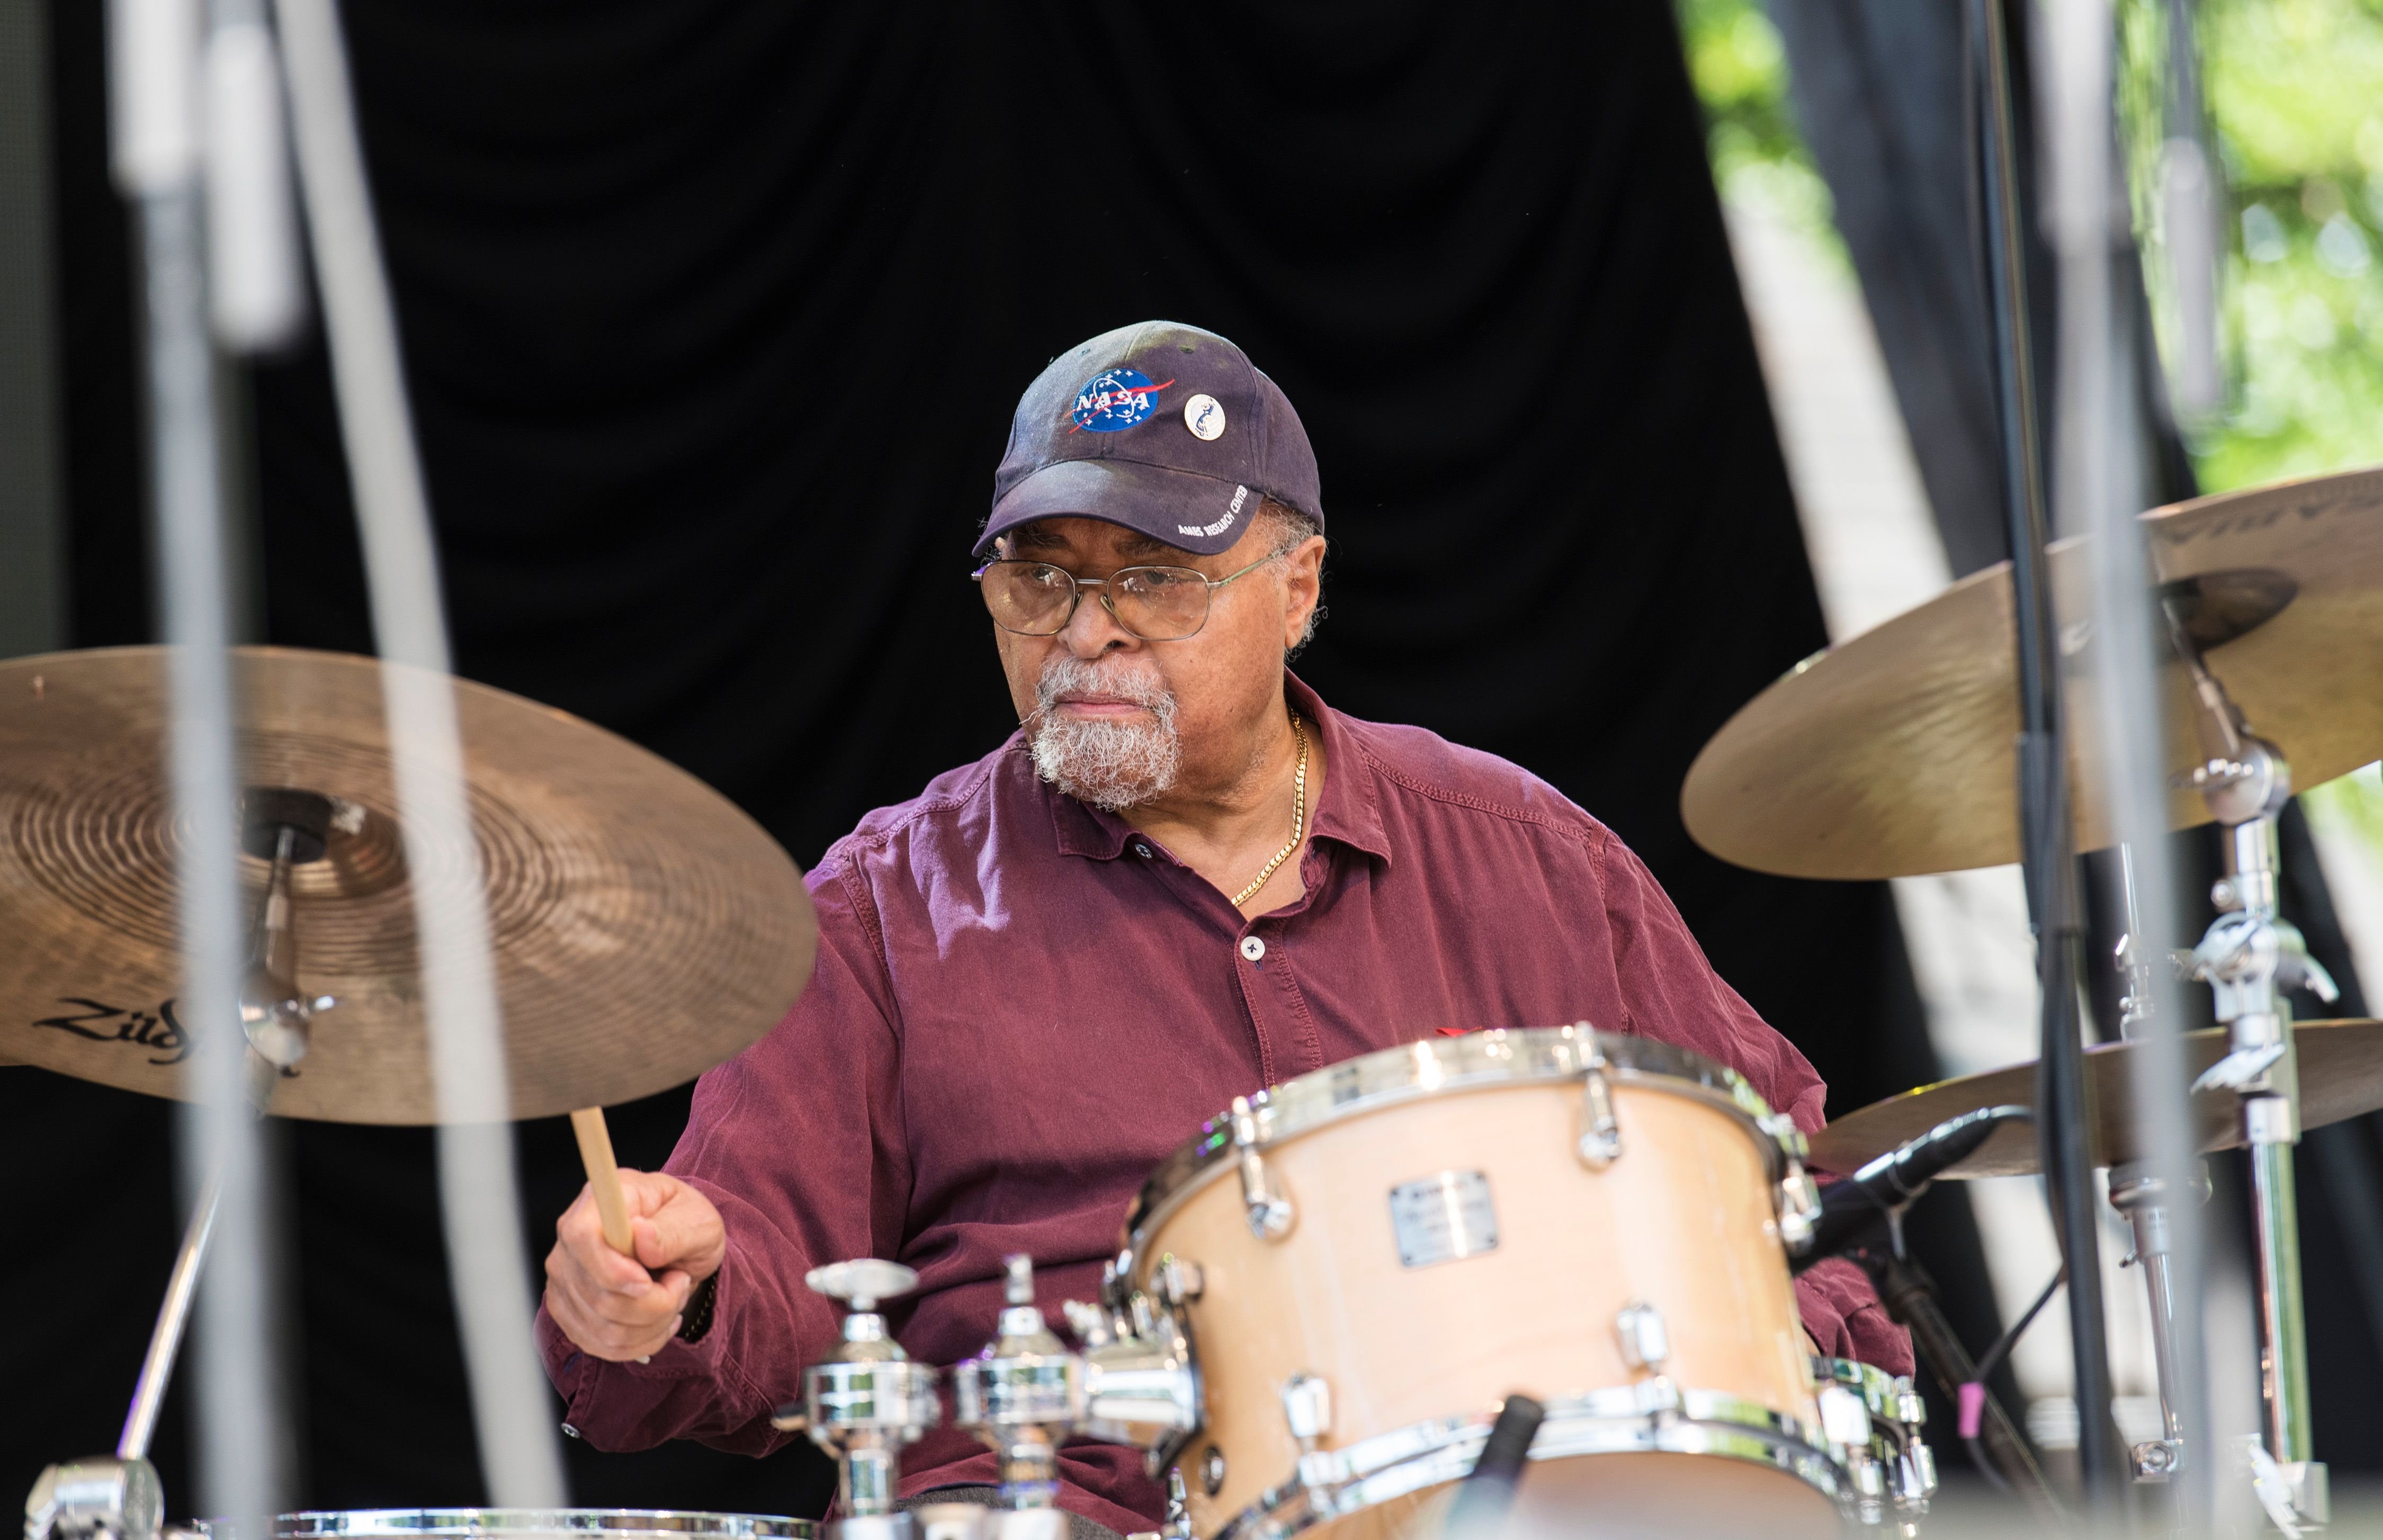 Jimmy Cobb performs with the Roy Hargrove Quintet during the Blue Note Jazz Festival at Central Park SummerStage, New York, New York, June 6, 2015 | Photo: Getty Images